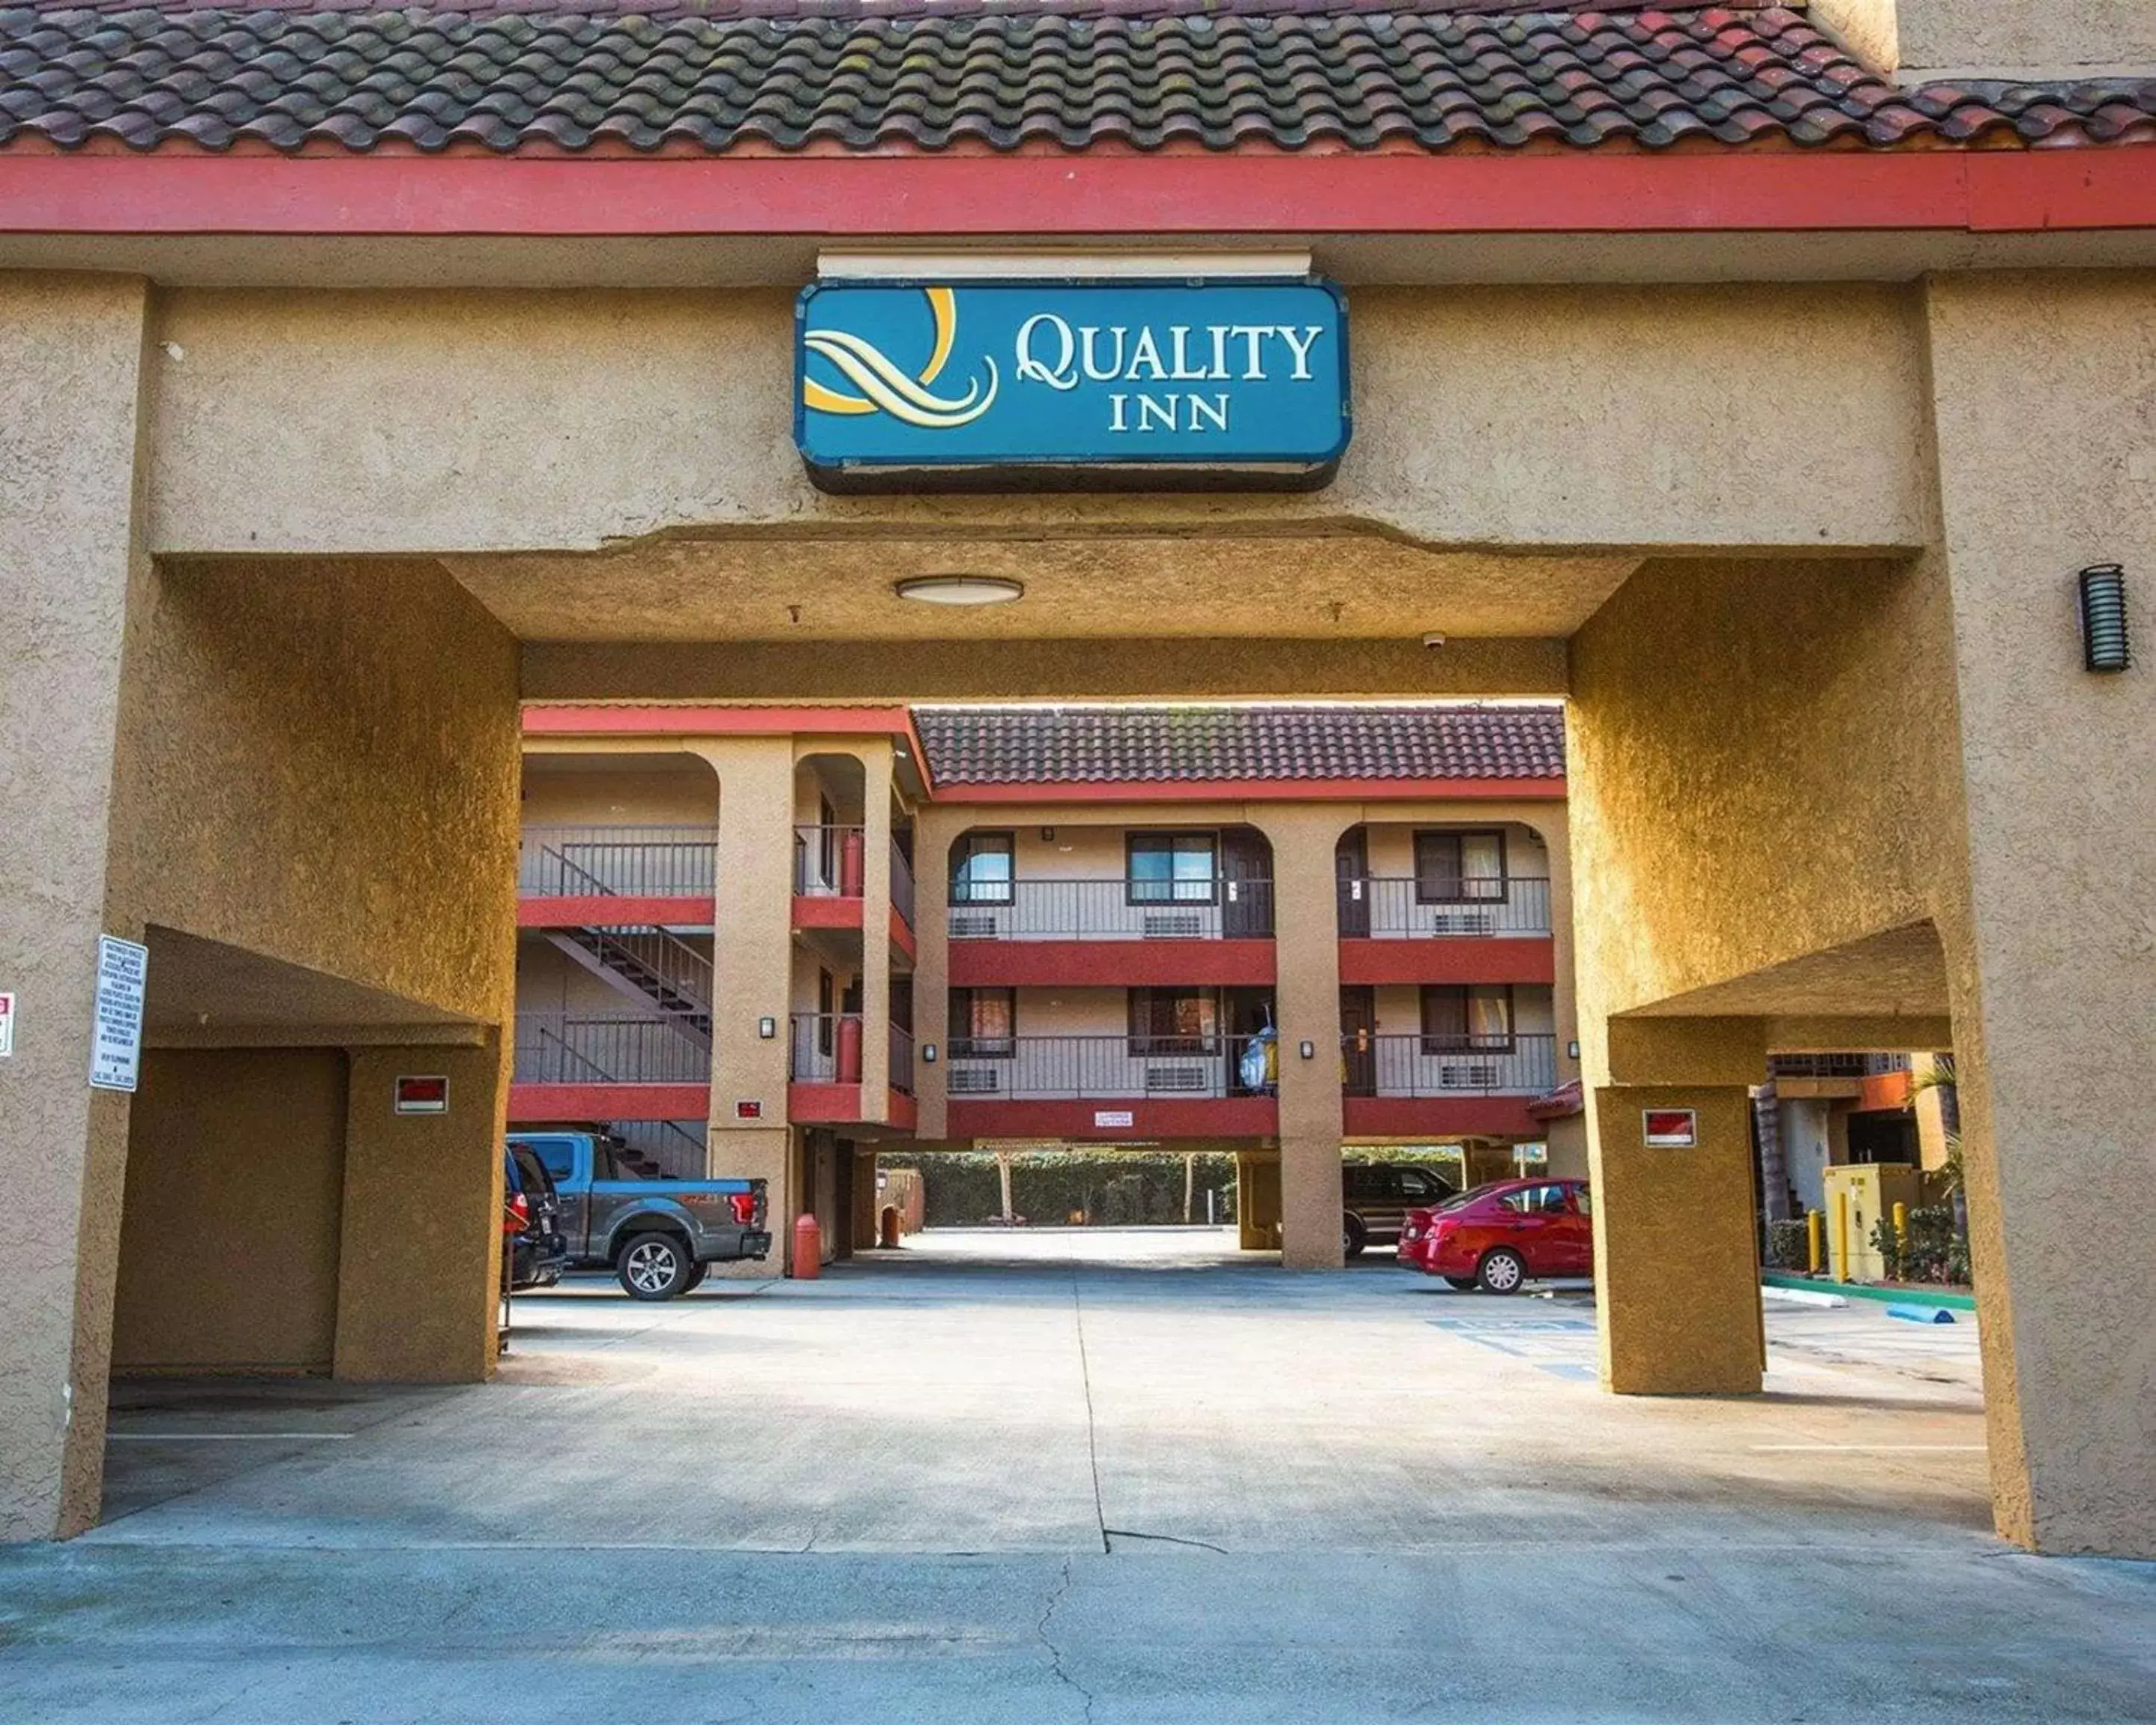 Property building in Quality Inn Downey